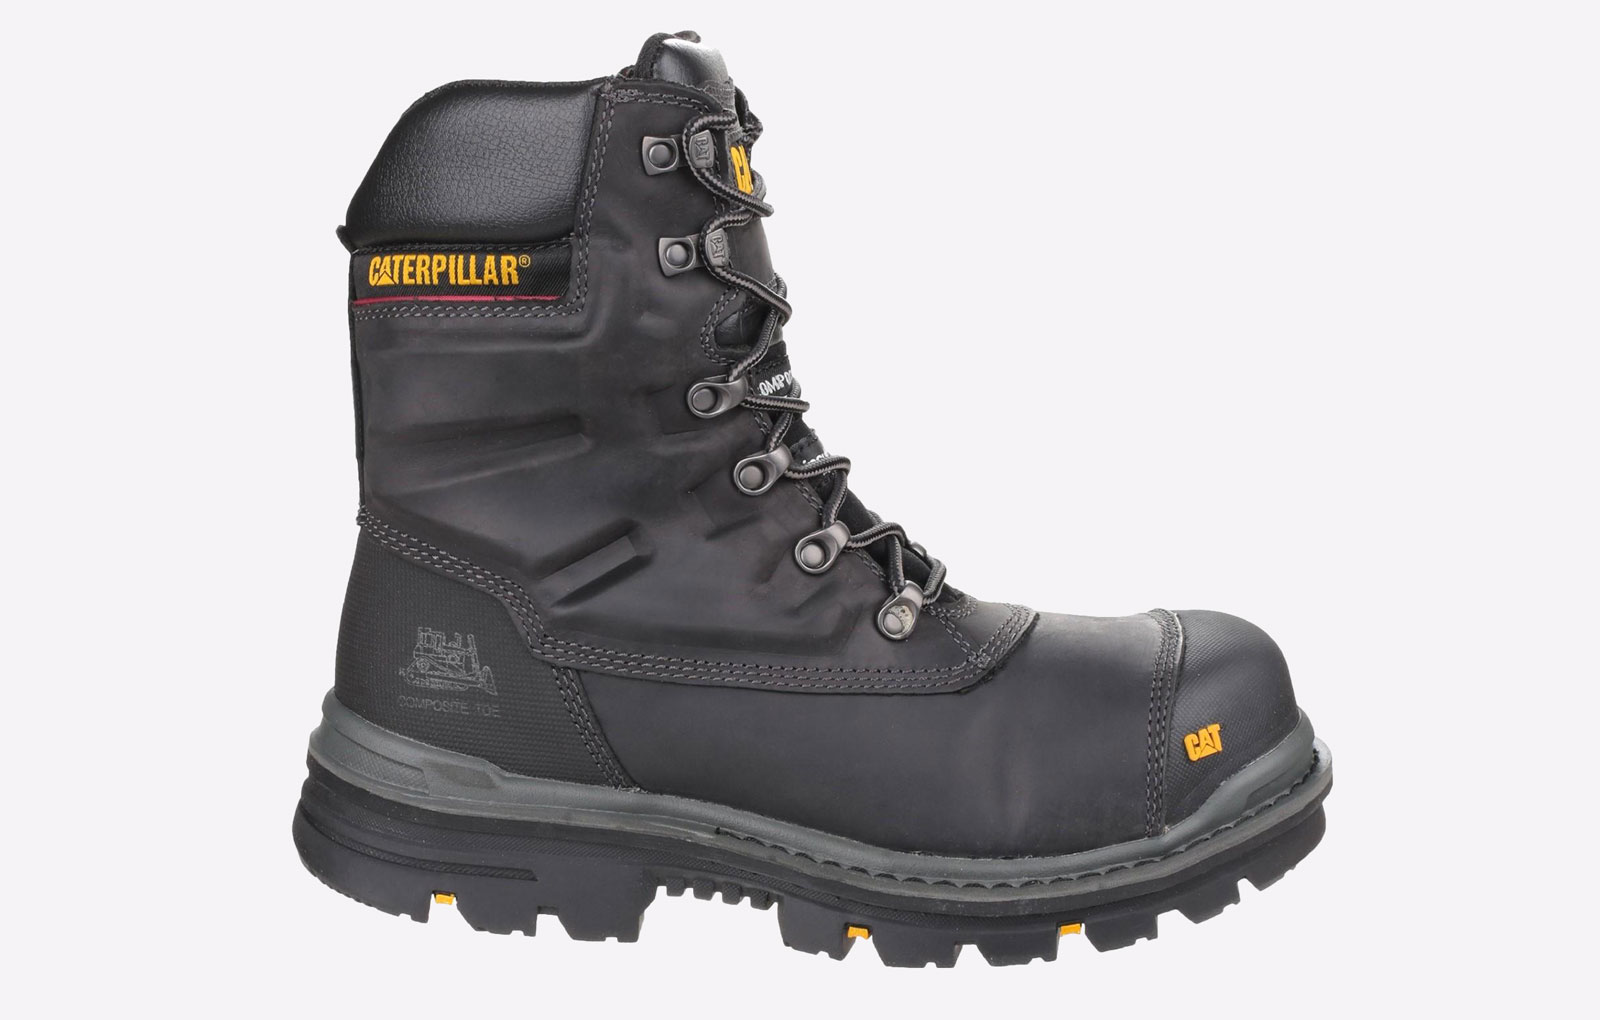 Caterpillar Premier Leather Waterproof Safety Boot Mens - GRD-24527-40565-10